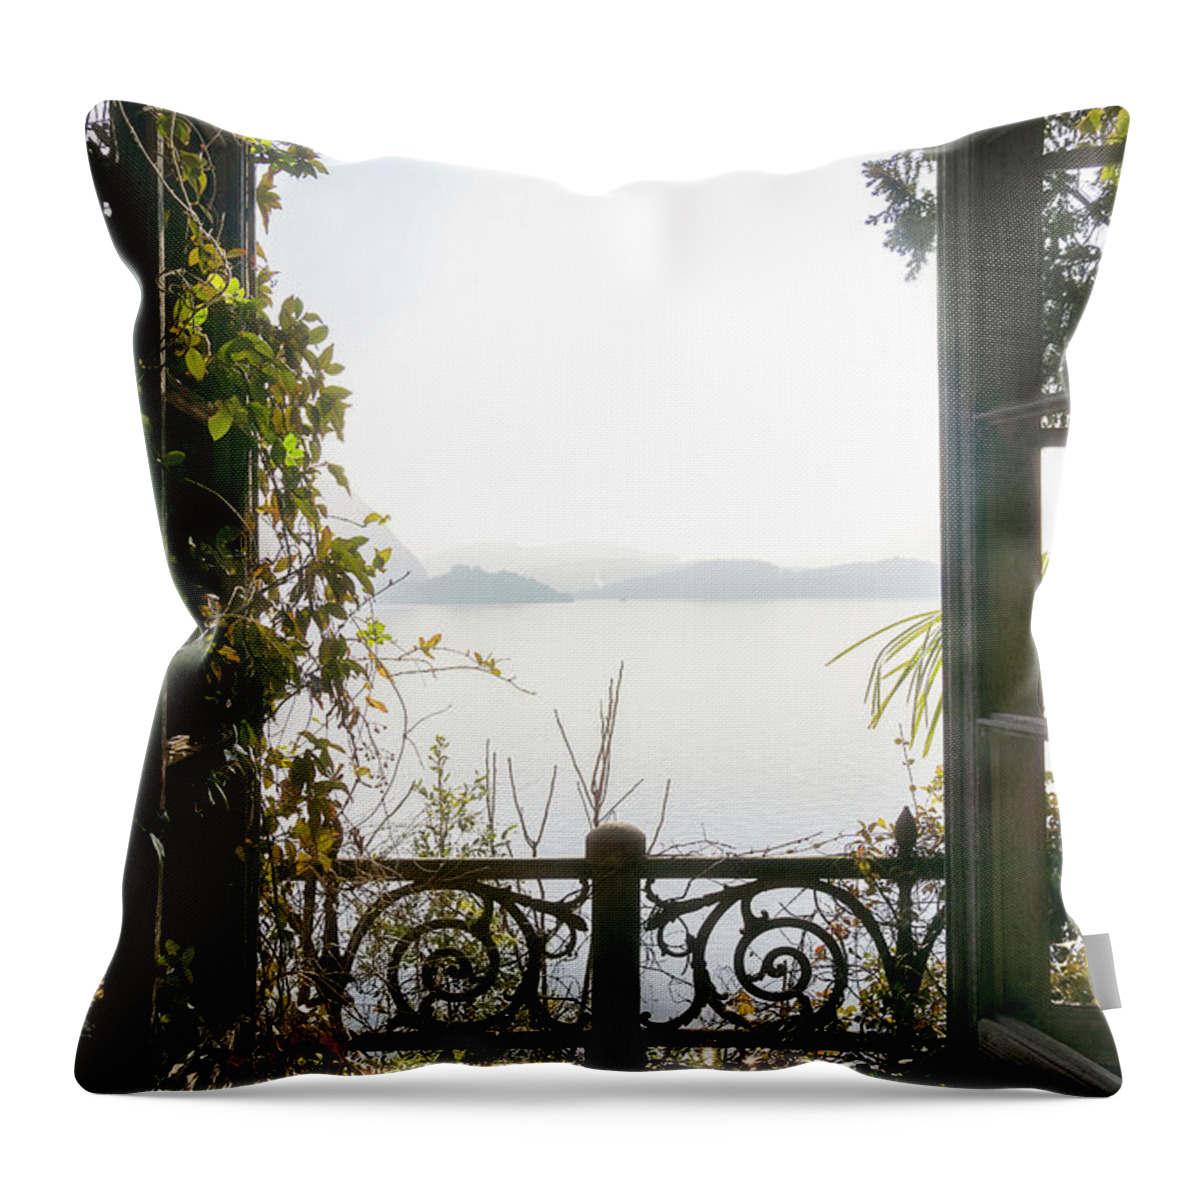 Urban Throw Pillow featuring the photograph Magical View through Window by Roman Robroek